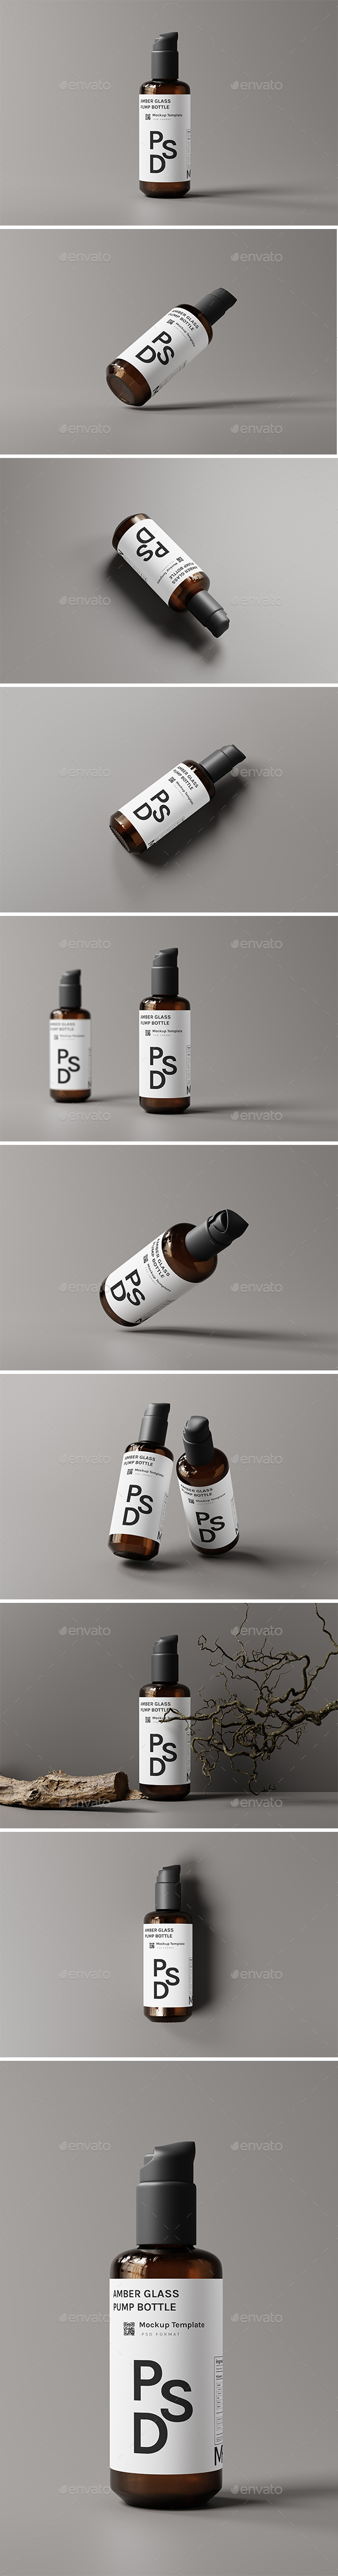 Pump Bottle with a Security Clip Closure Mockups